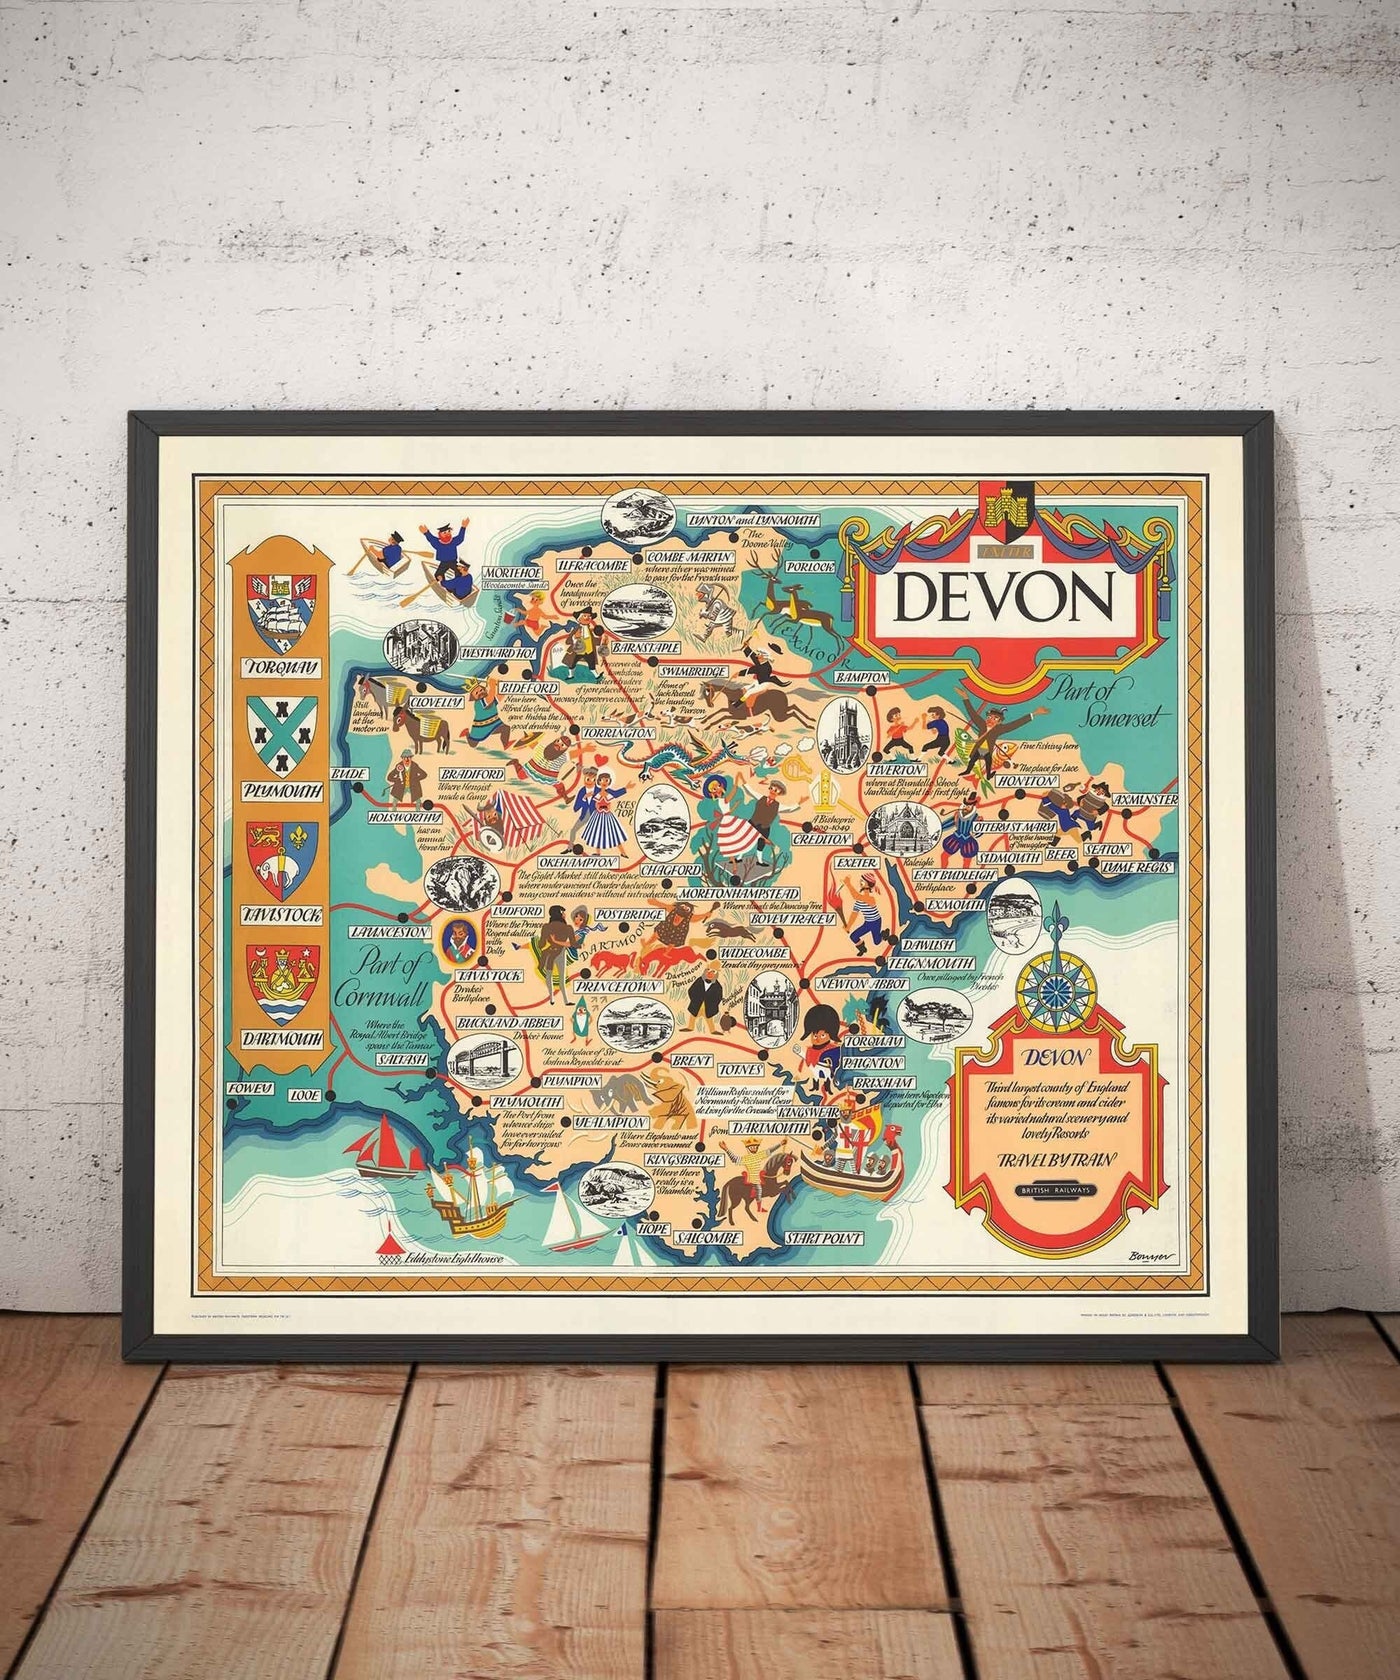 Old Pictorial Map of Devon, 1950 by Bowyer - British Railway, Torquay, Torrington, Clovelly, West Country